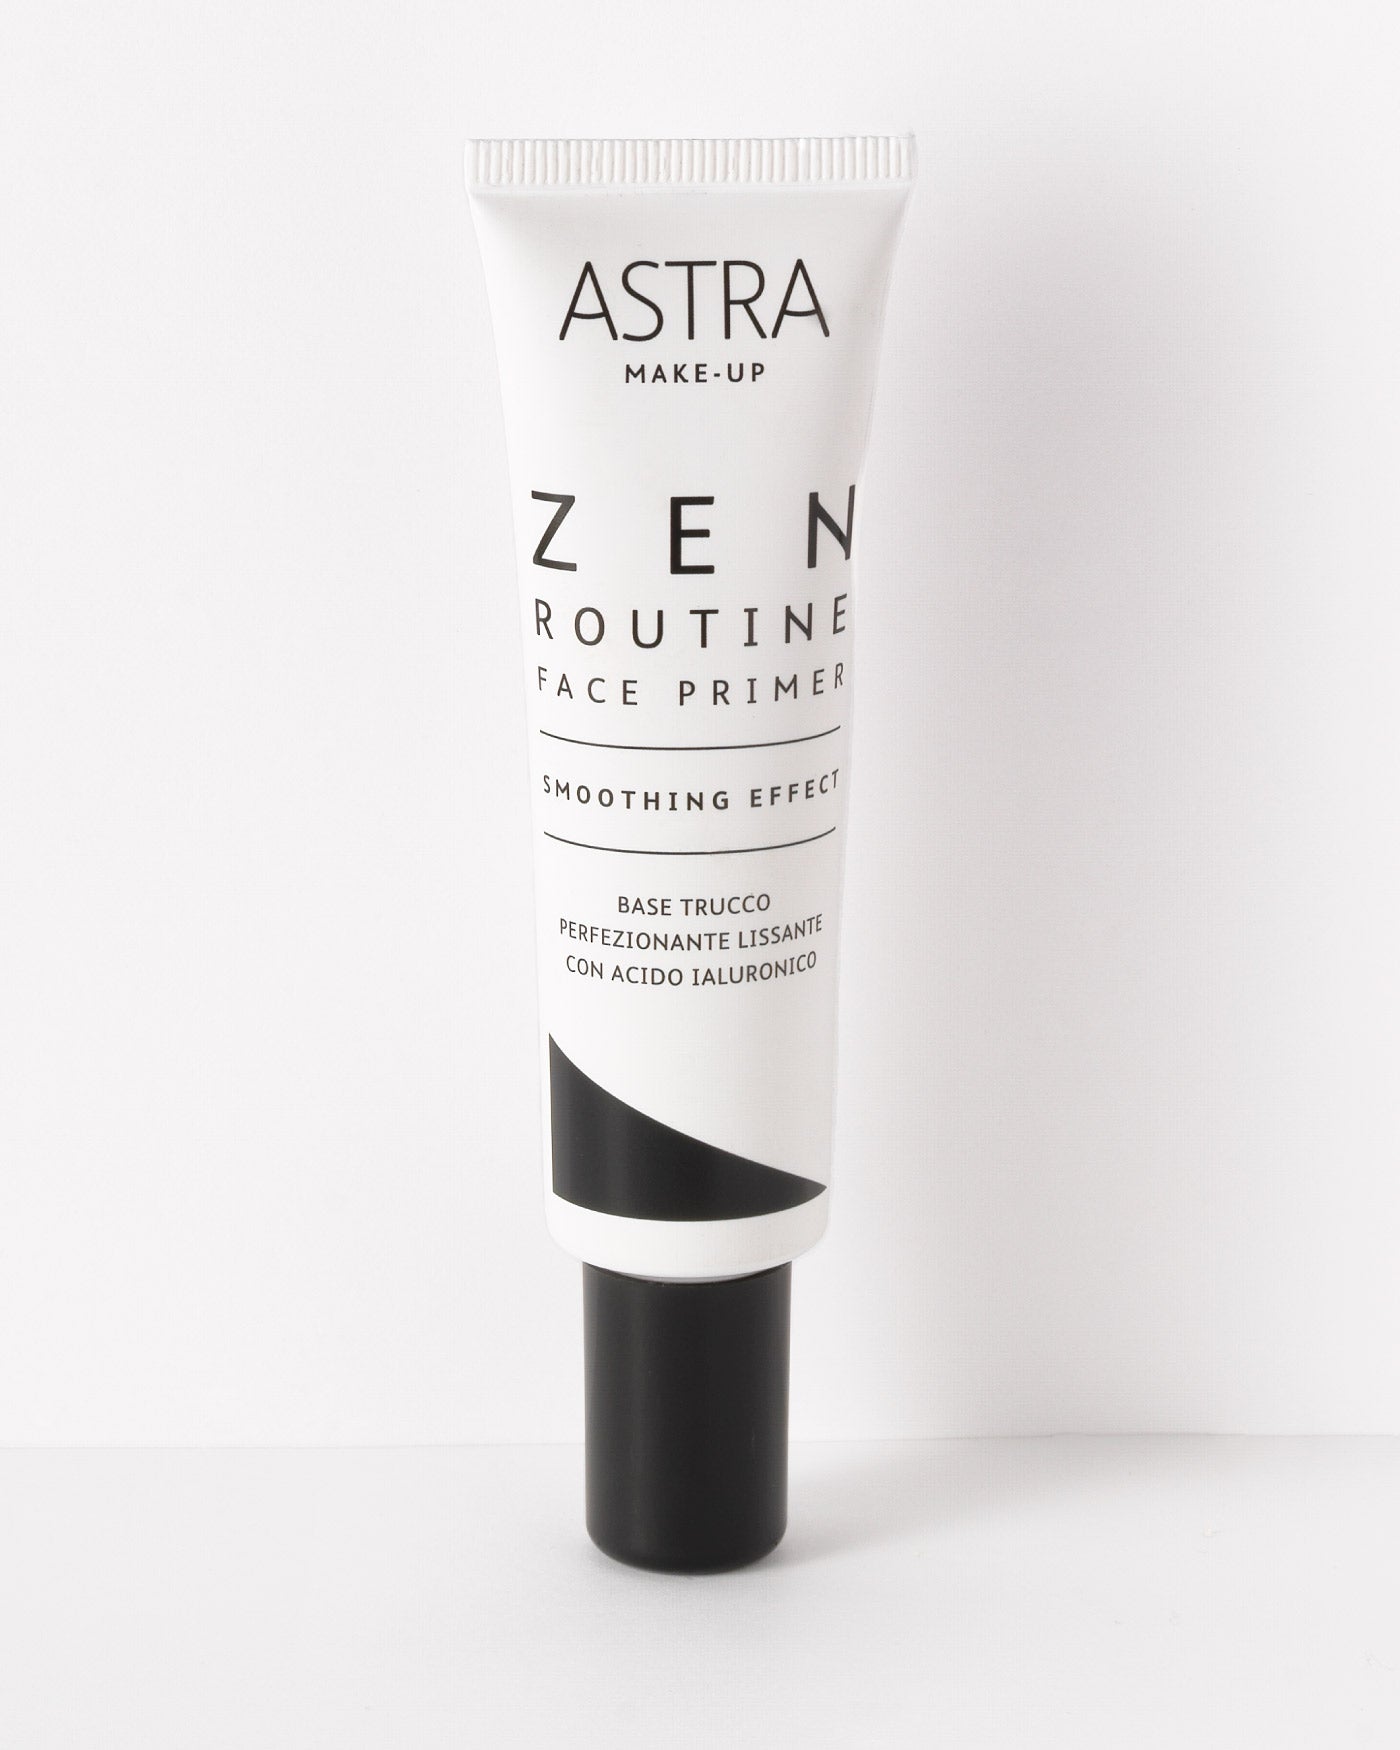 ZEN ROUTINE FACE PRIMER SMOOTHING EFFECT - 01 - Veil - Astra Make-Up